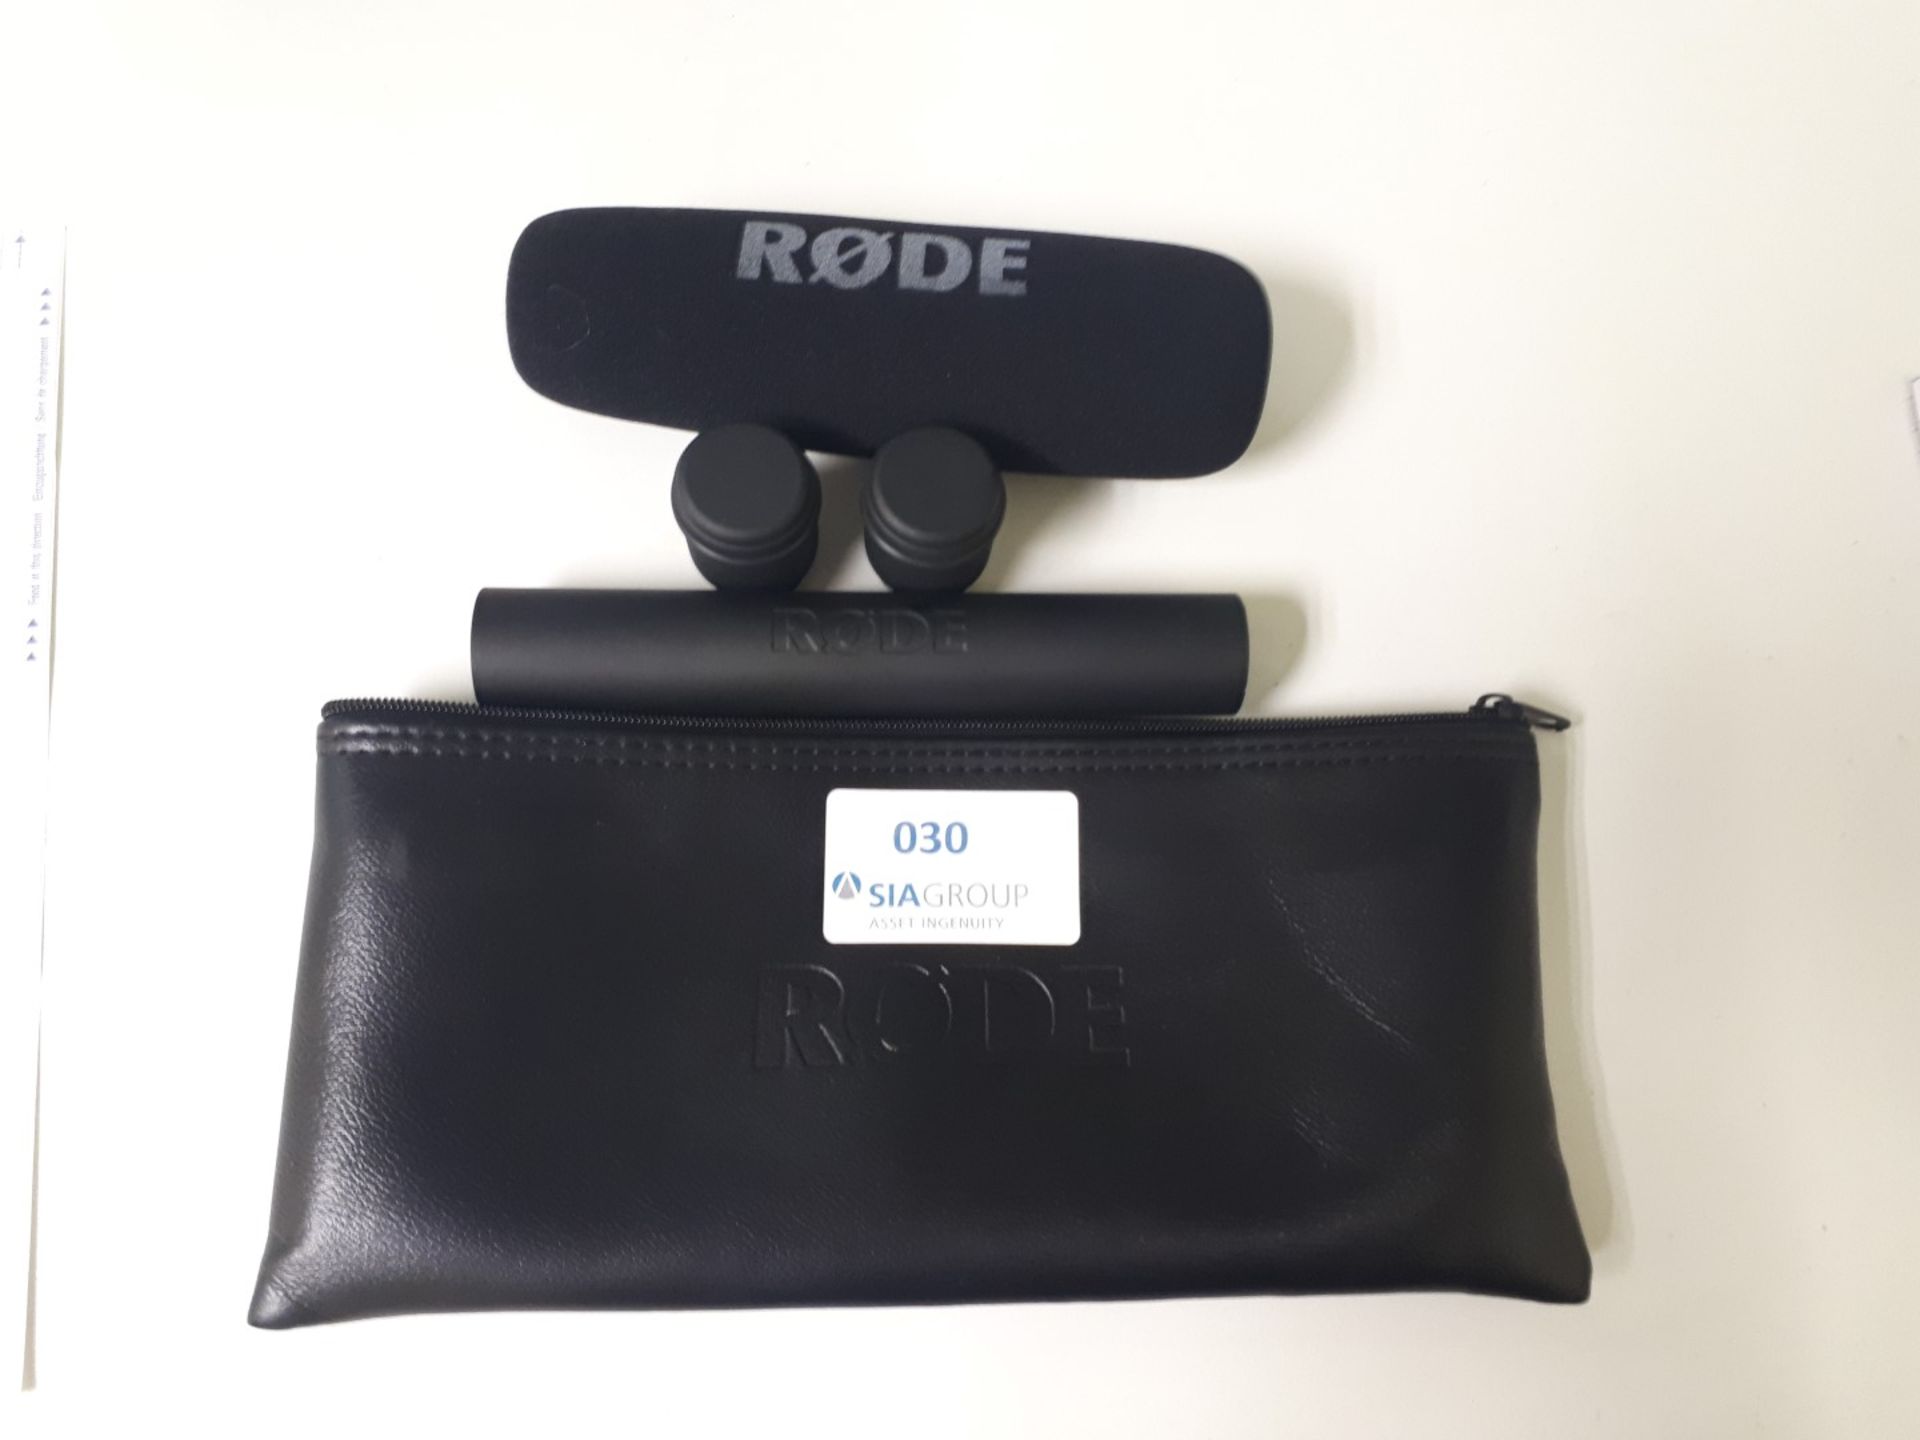 Rode Microphone Accessories